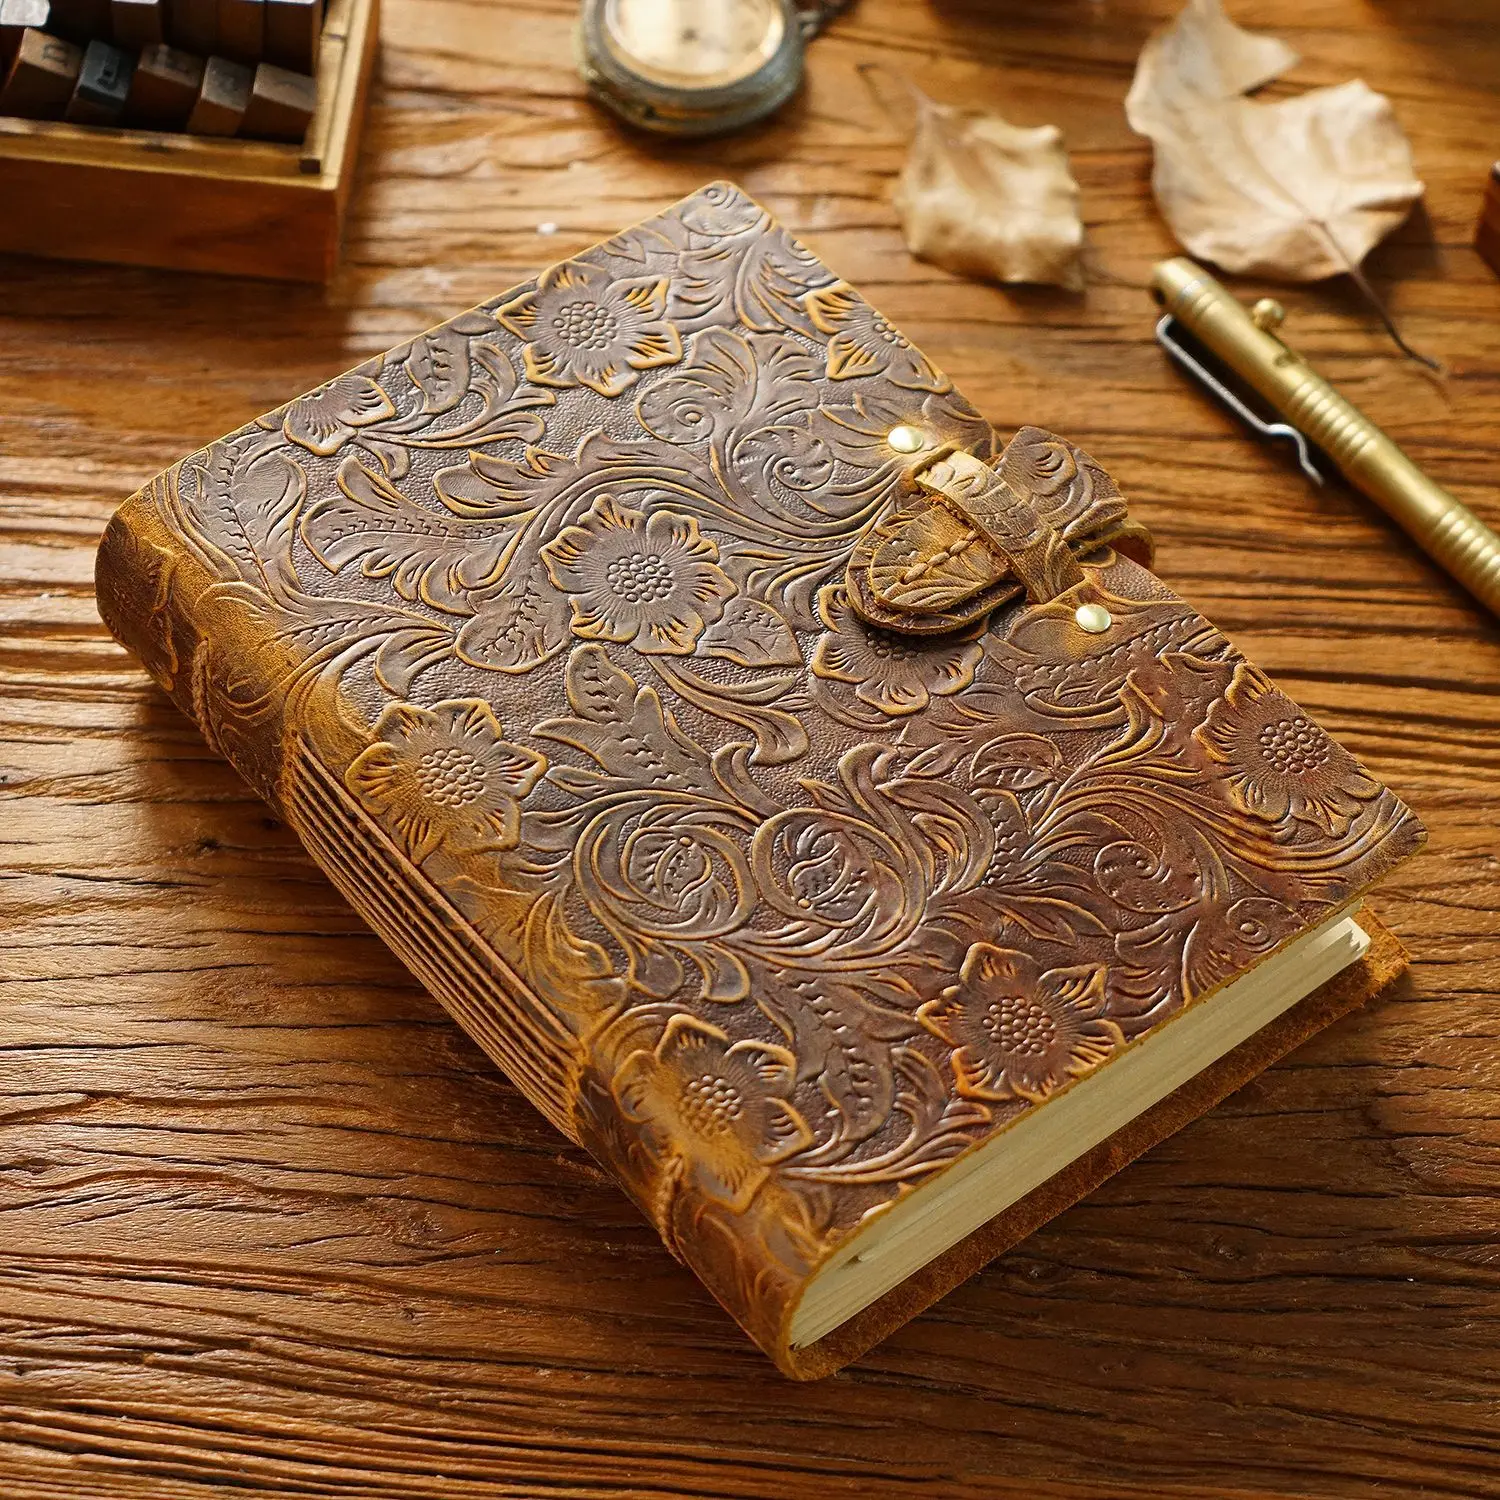 Handmade Leather A5 Sketchbook Cover Drawing Book case leather journal cover